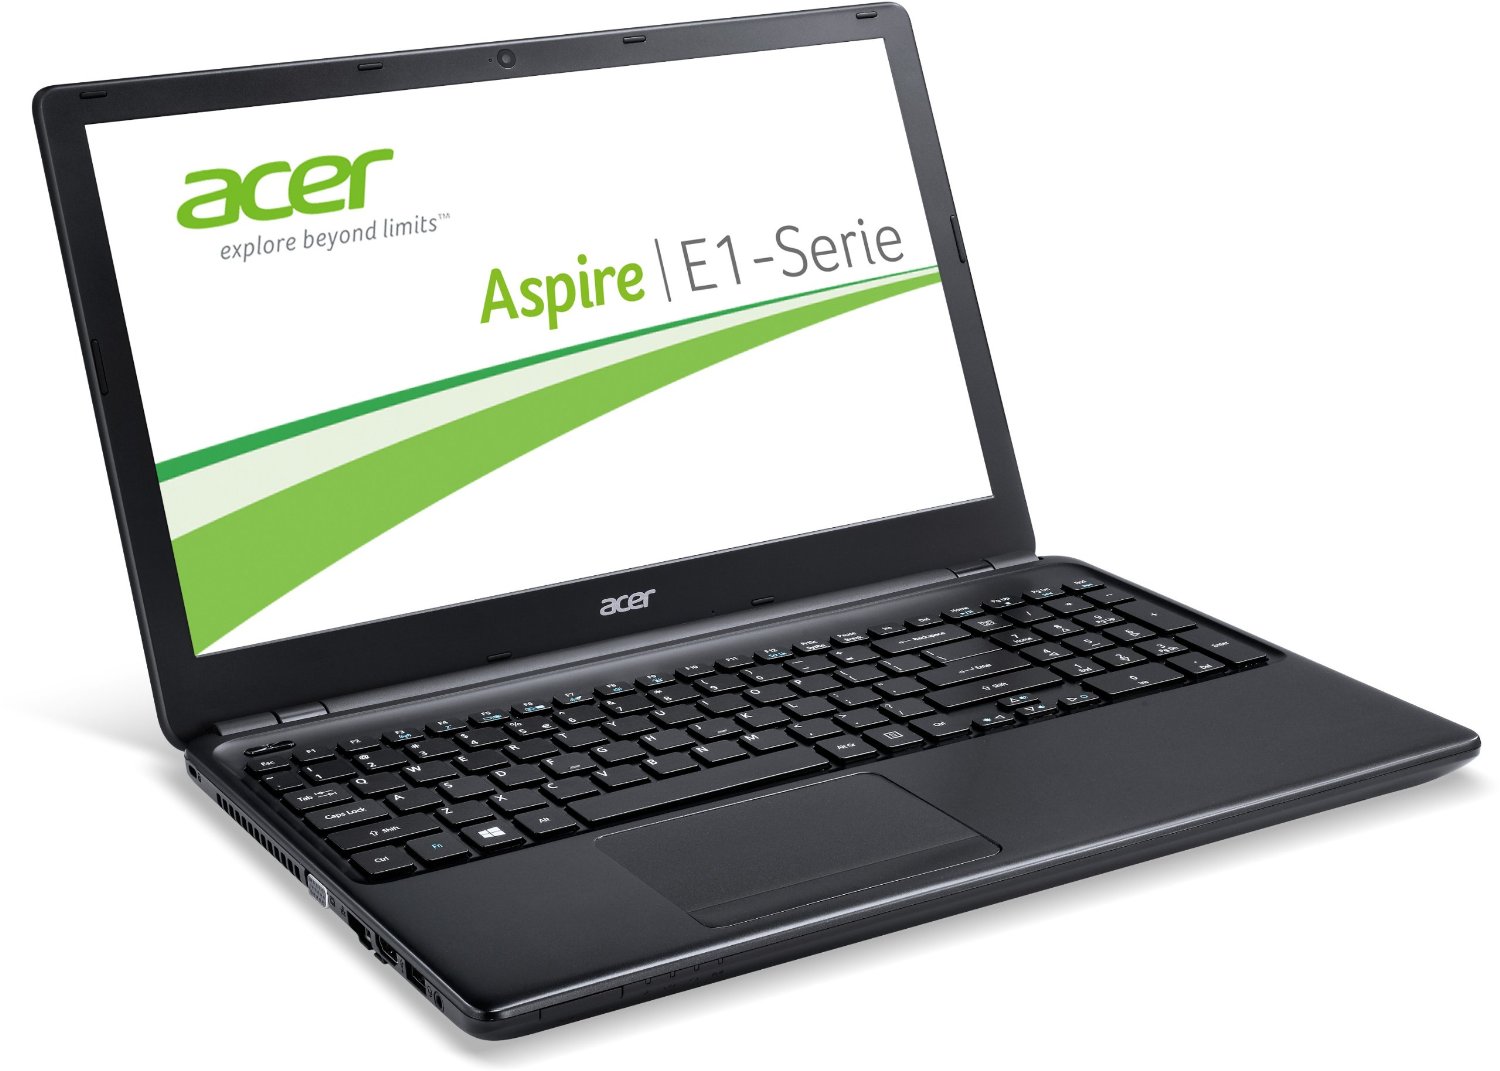 acer network drivers for windows 7 free download 64 bit